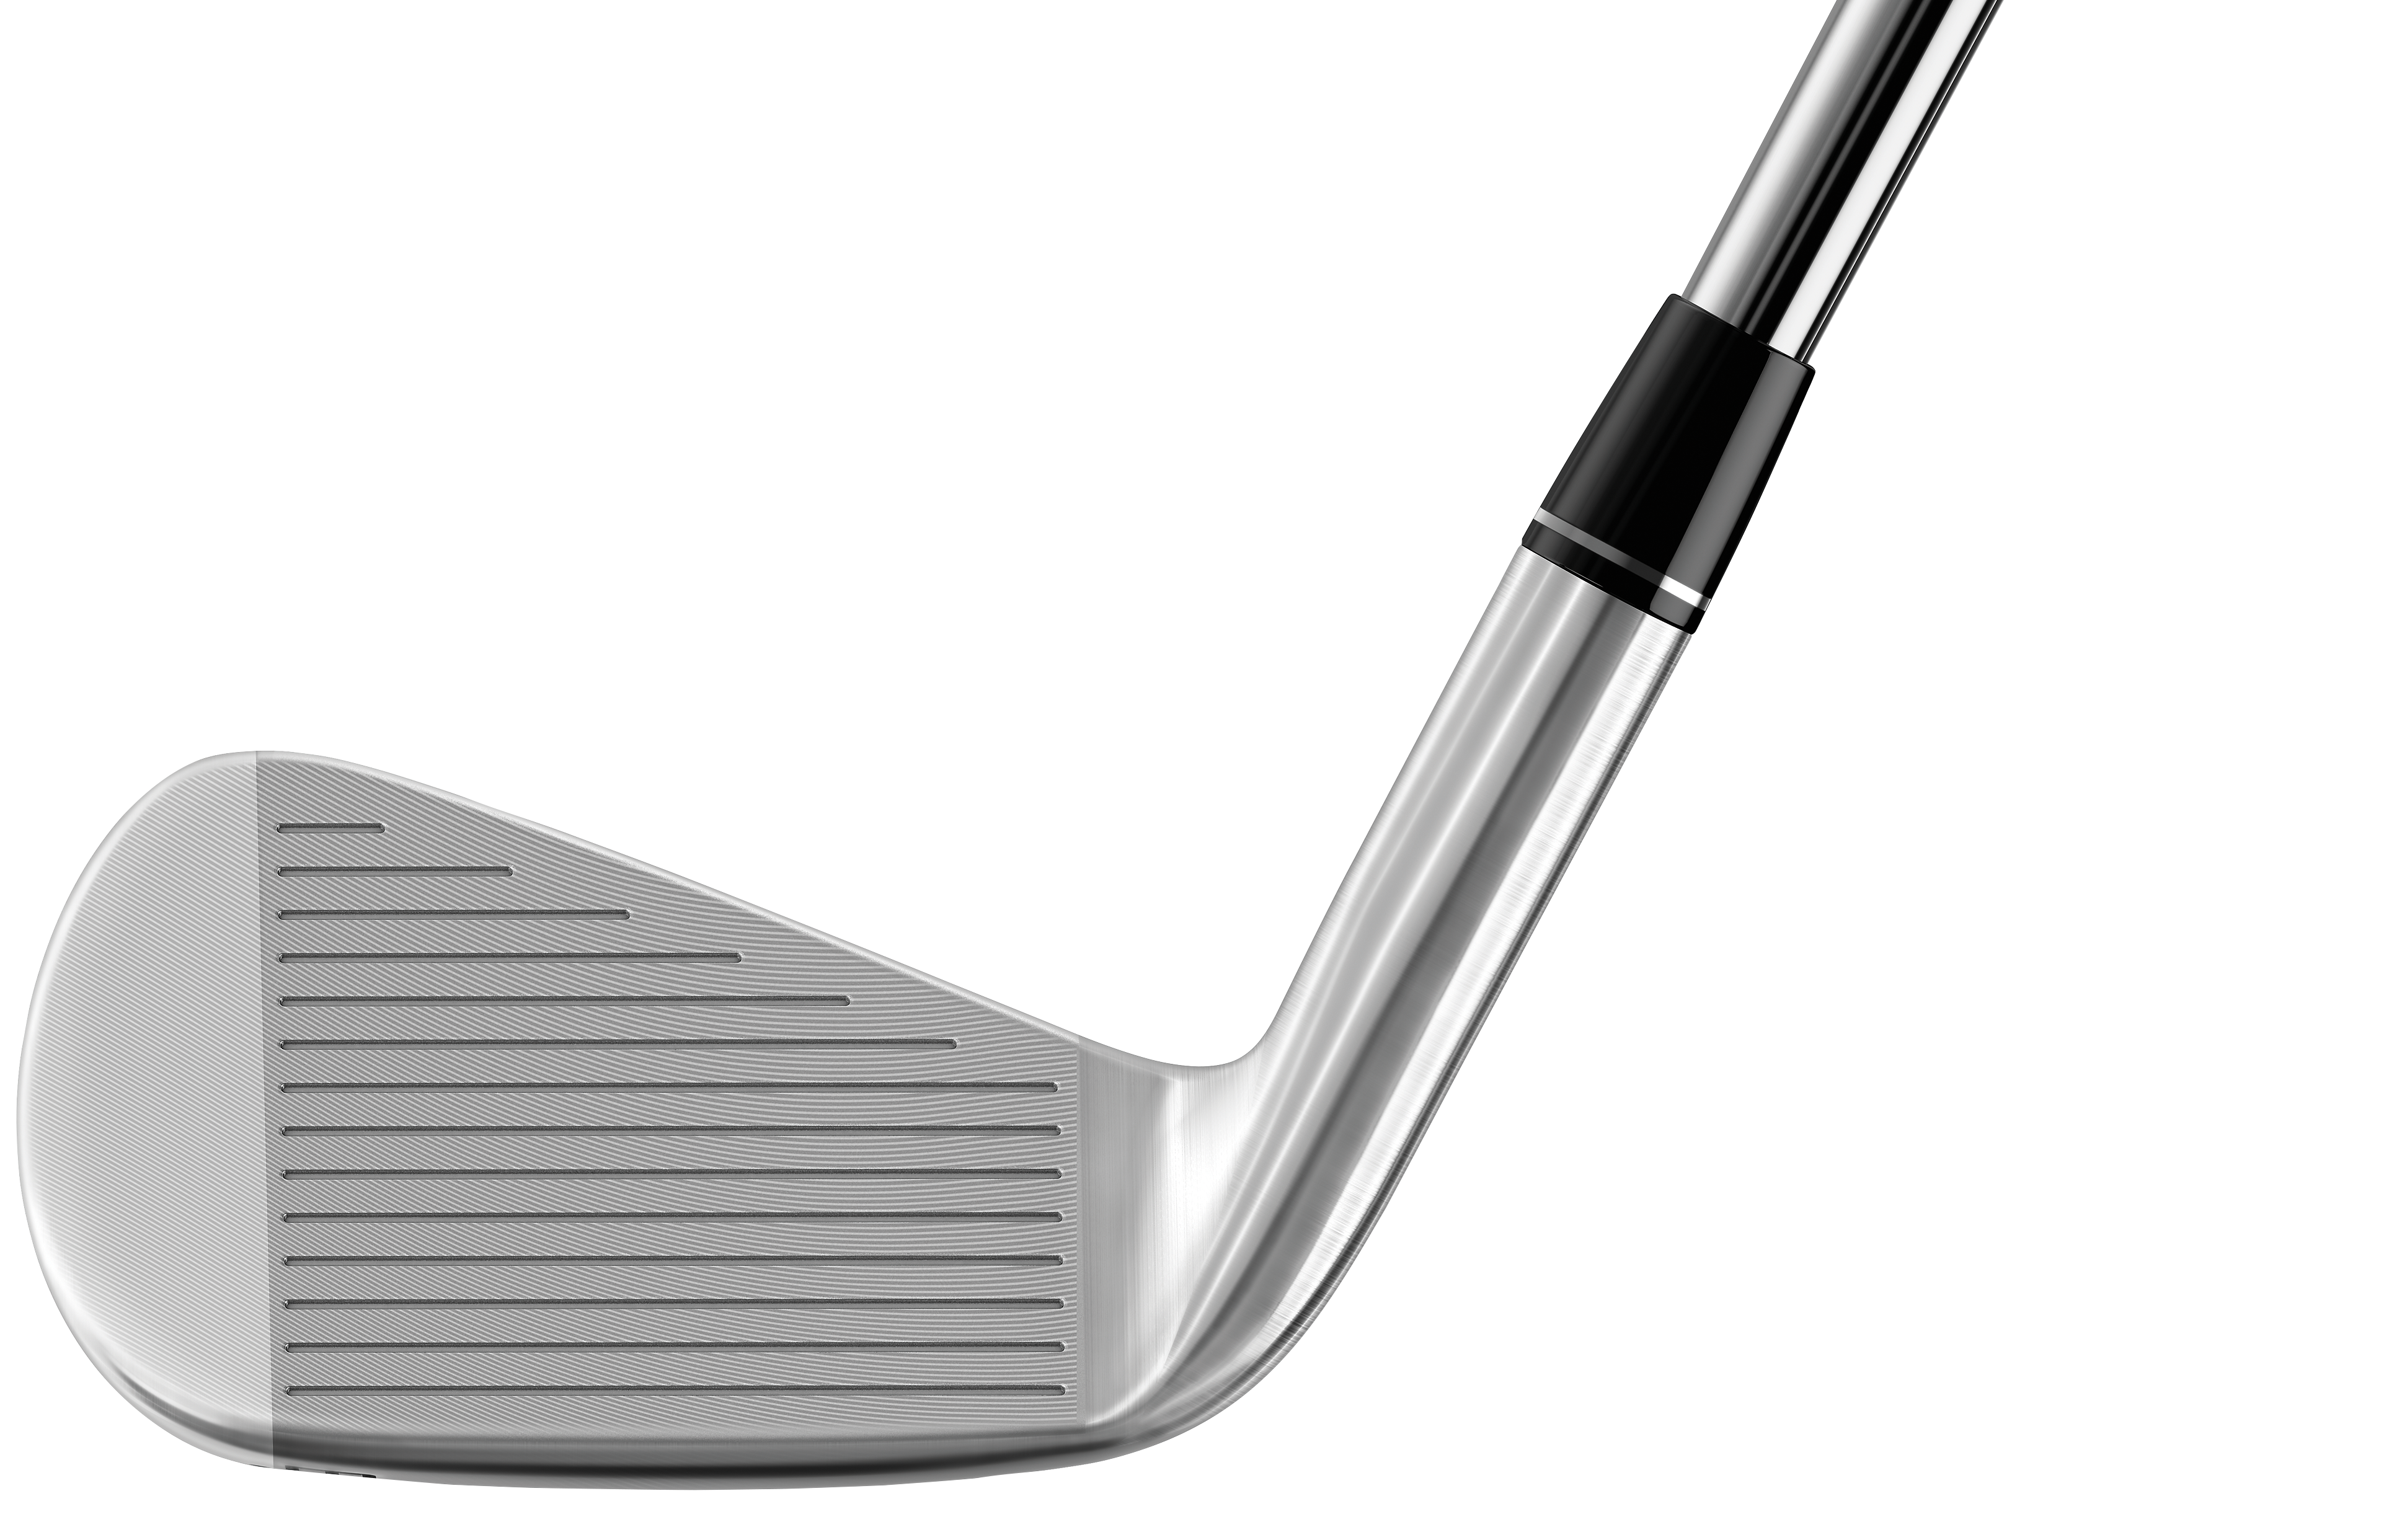 TaylorMade reveals P770/P750 Tour Proto player irons